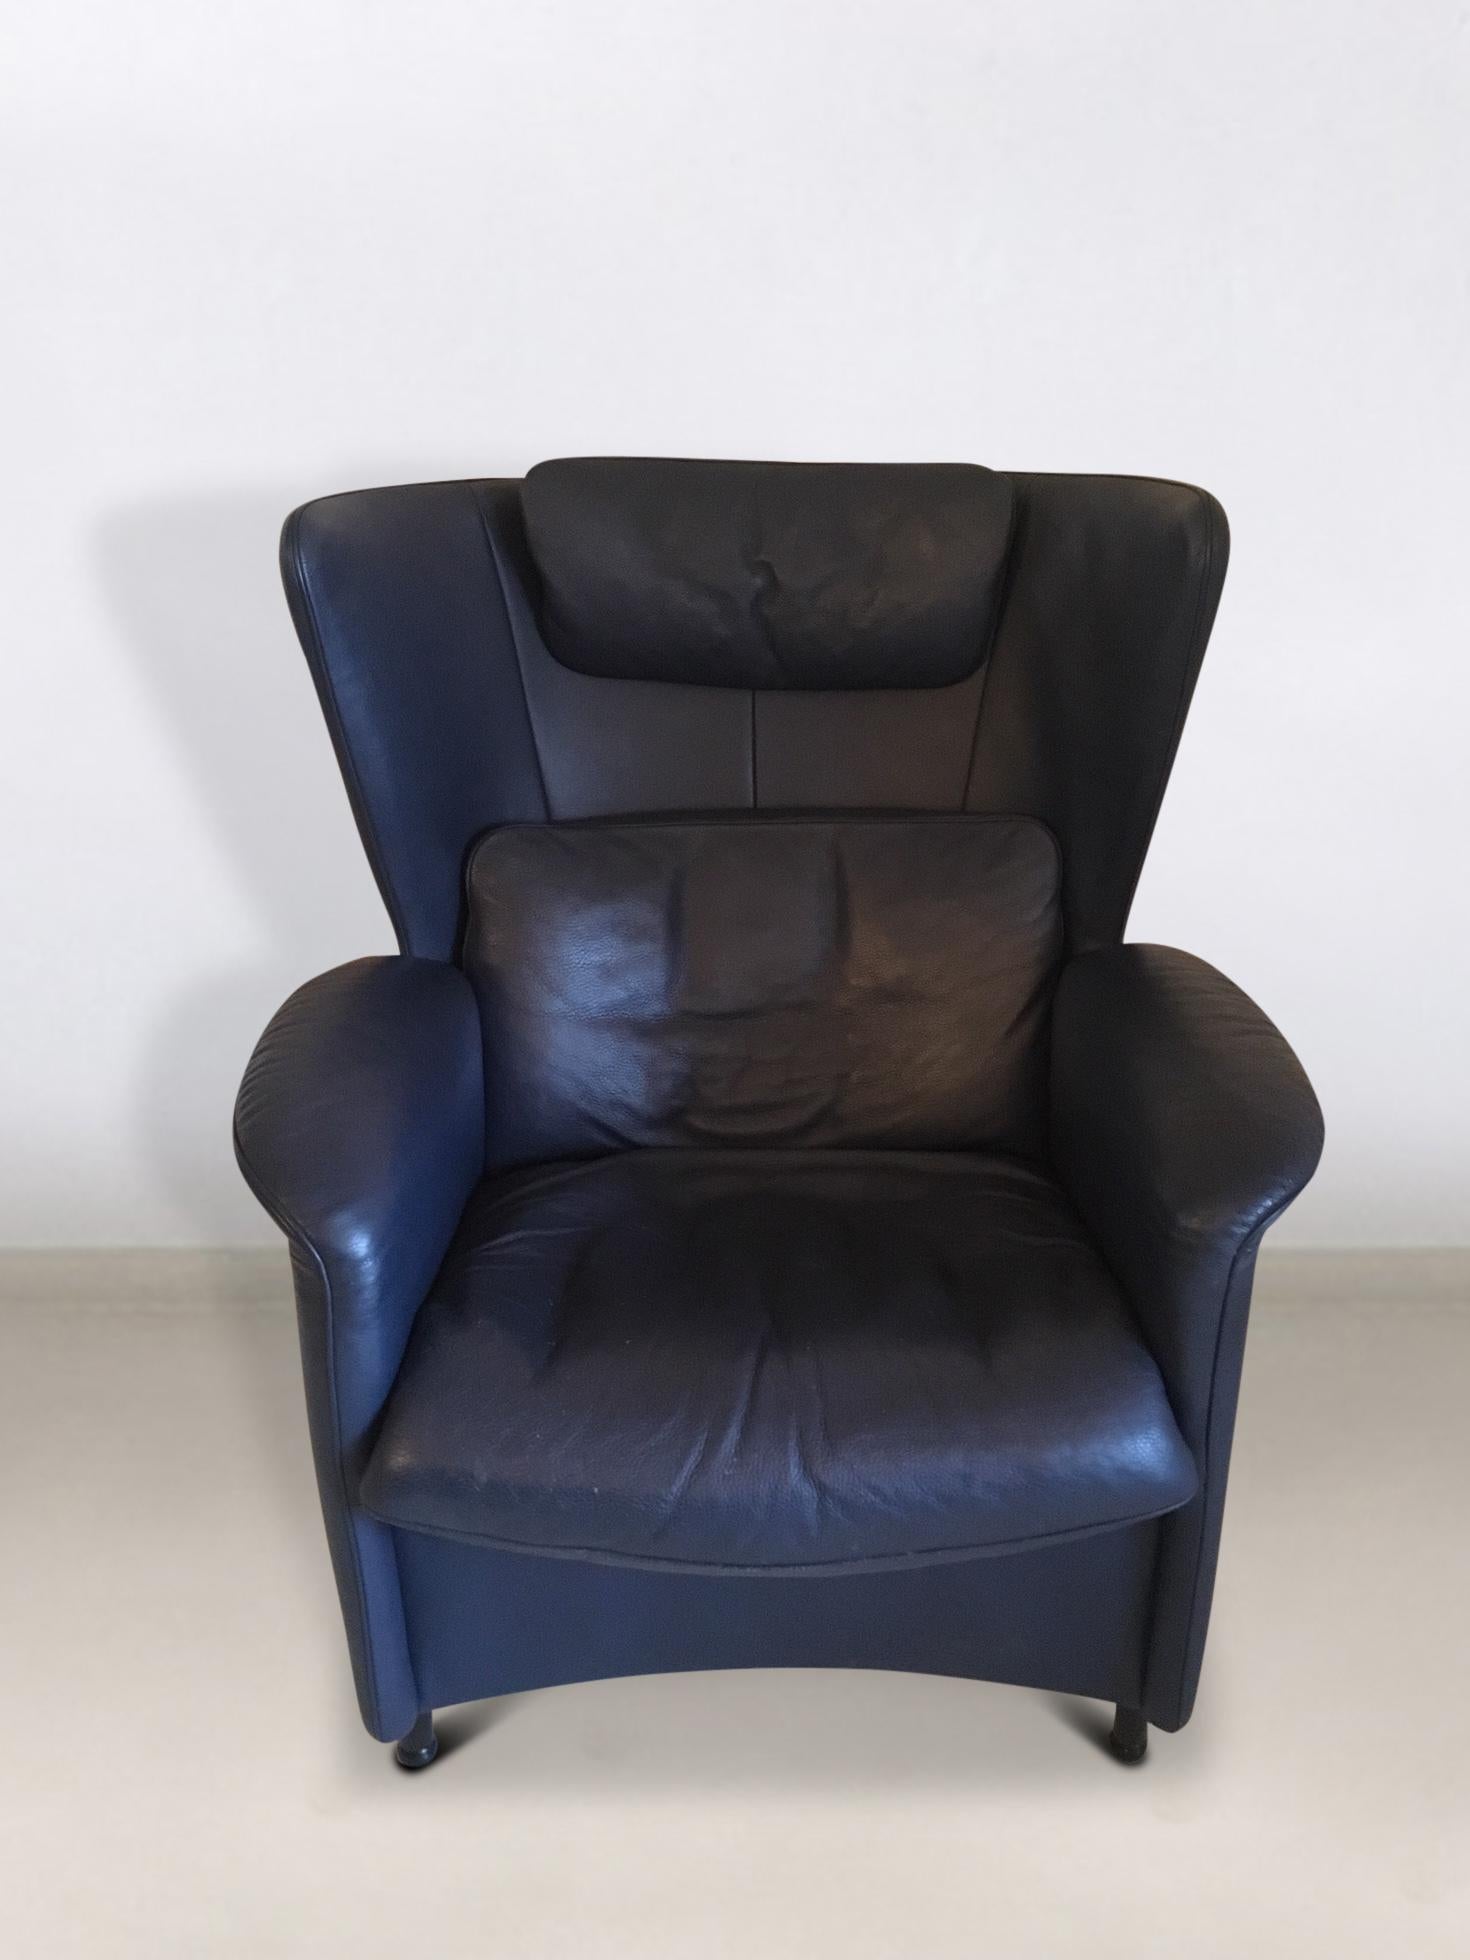 Swiss Blue Leather Lounge Chair and Footstool by De Sede, Model DS-23, 1990s For Sale